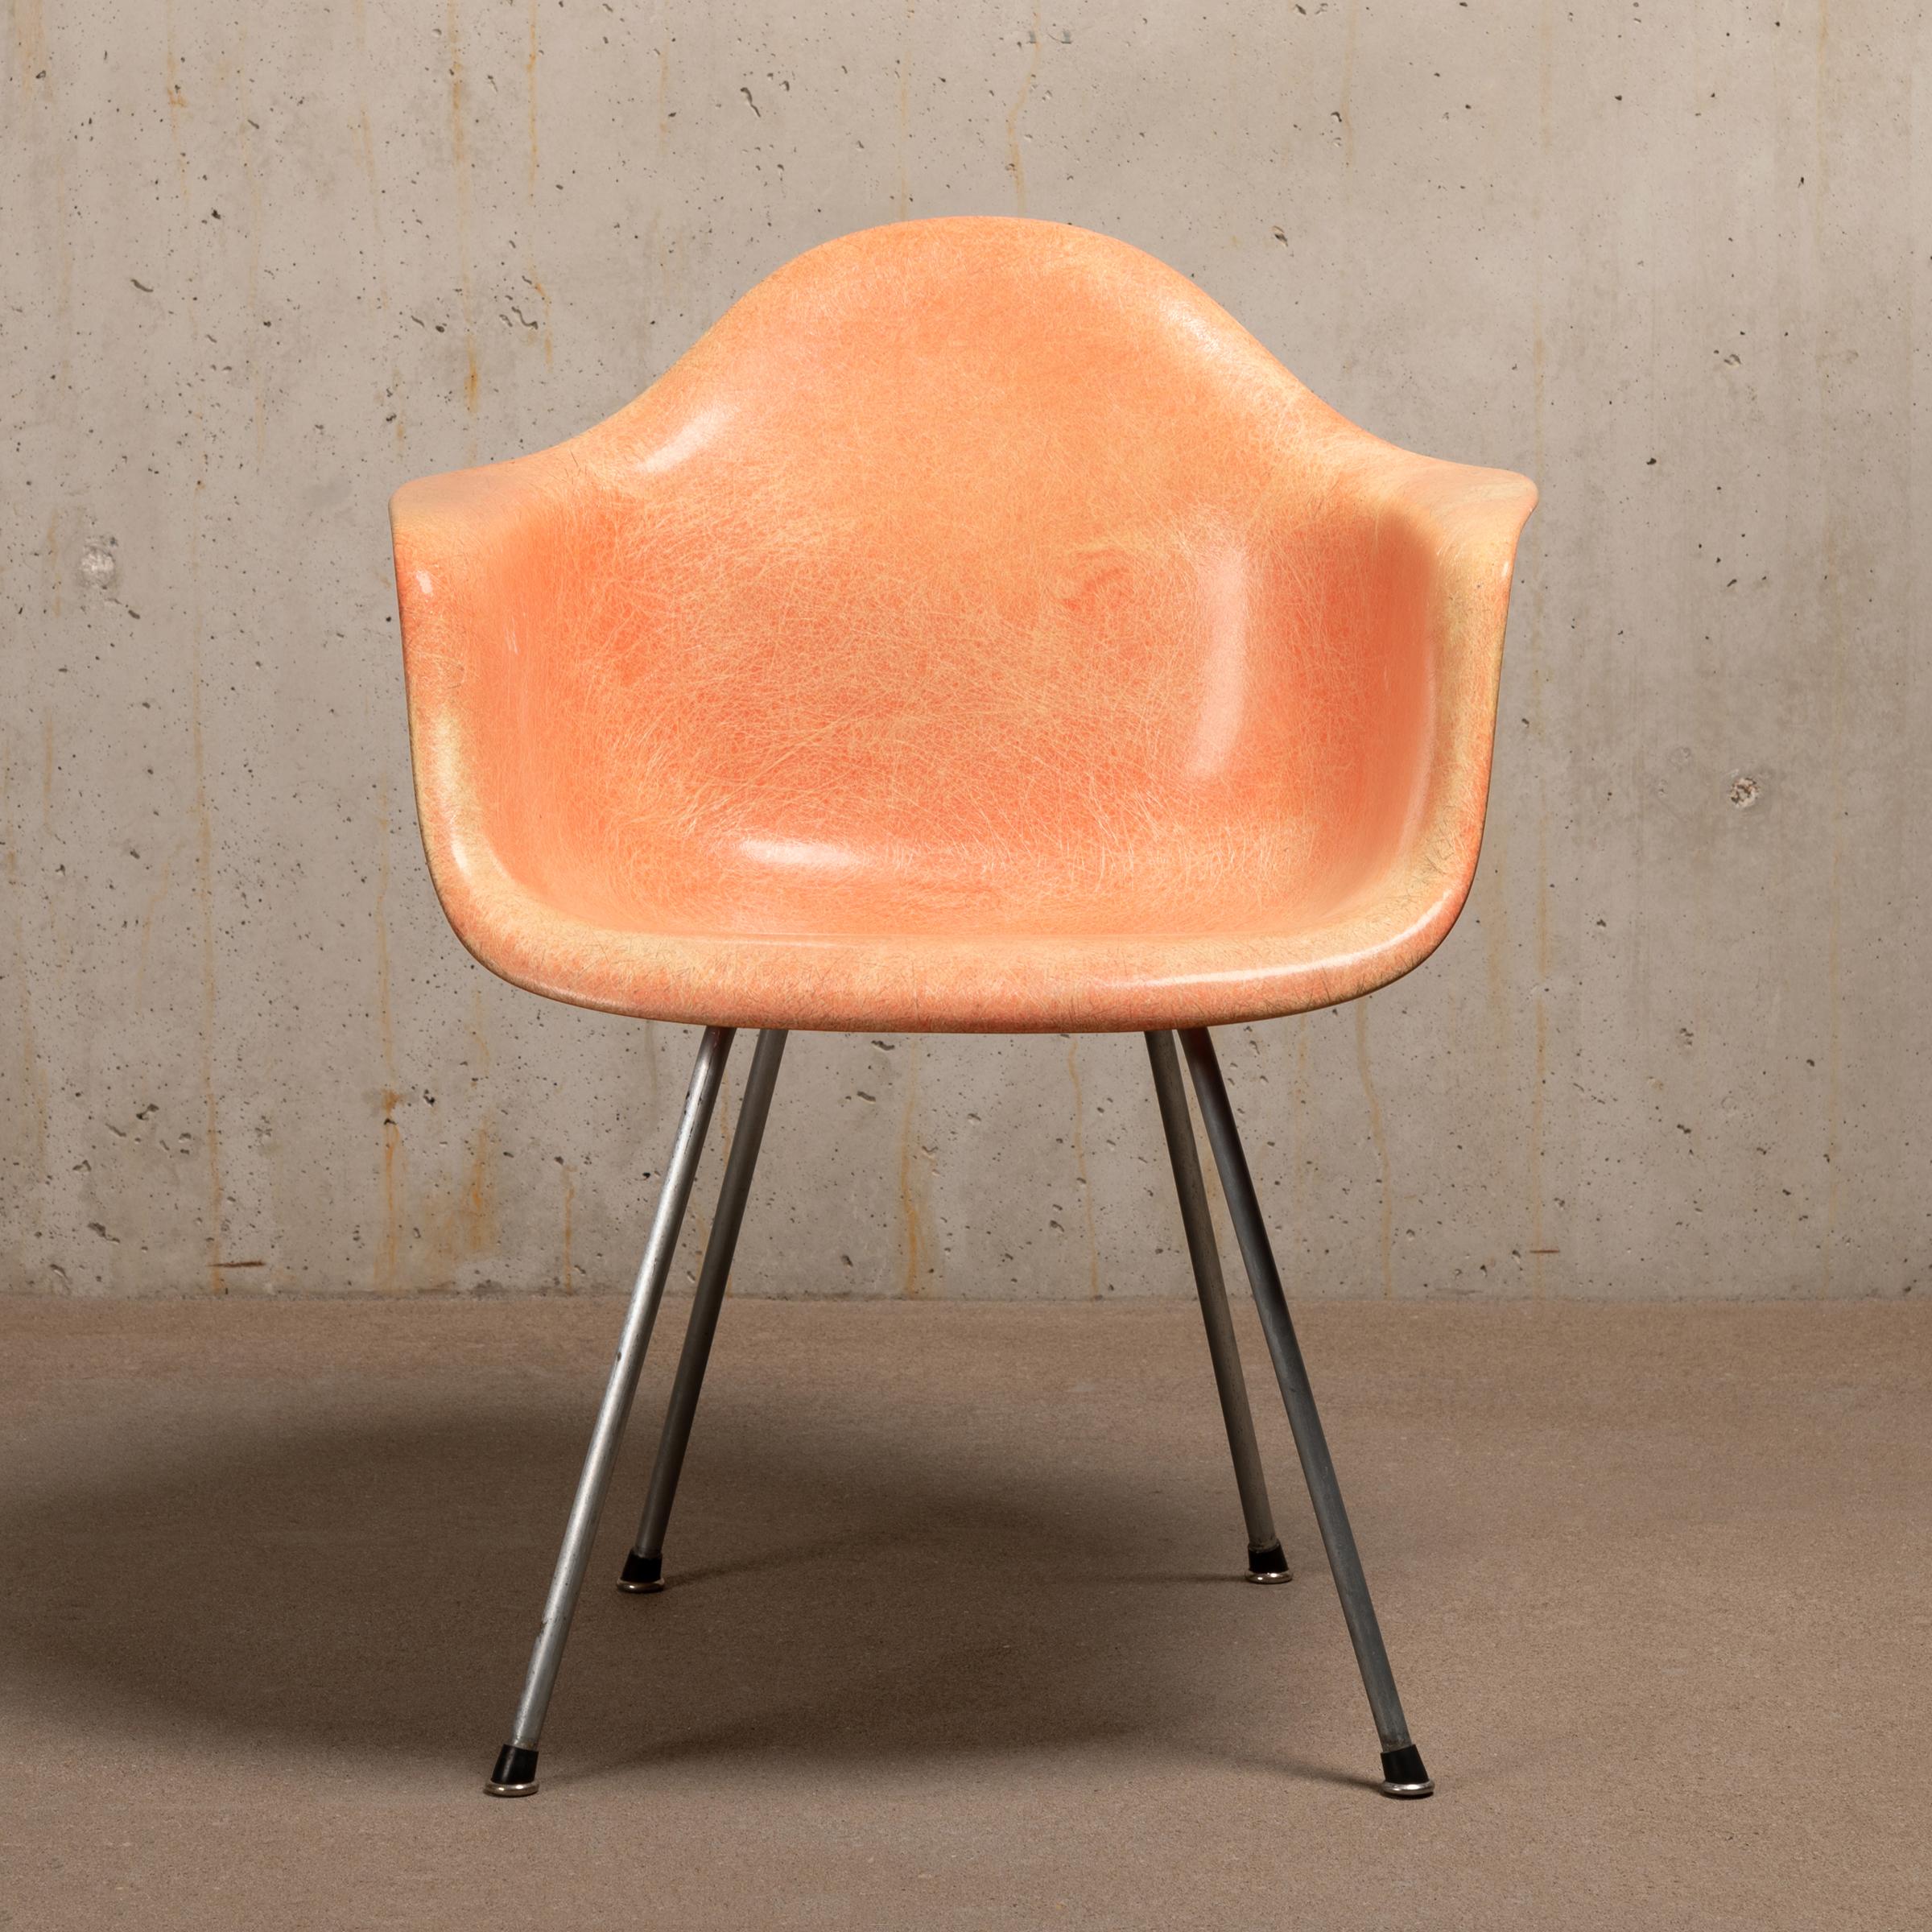 Iconic DAX chair in Salmon fibreglass designed by Charles and Ray Eames. The chair is in very good condition with only light traces of use. First generation Zenith Plastics production with rope edge. Signed with 'checkerboard label'.